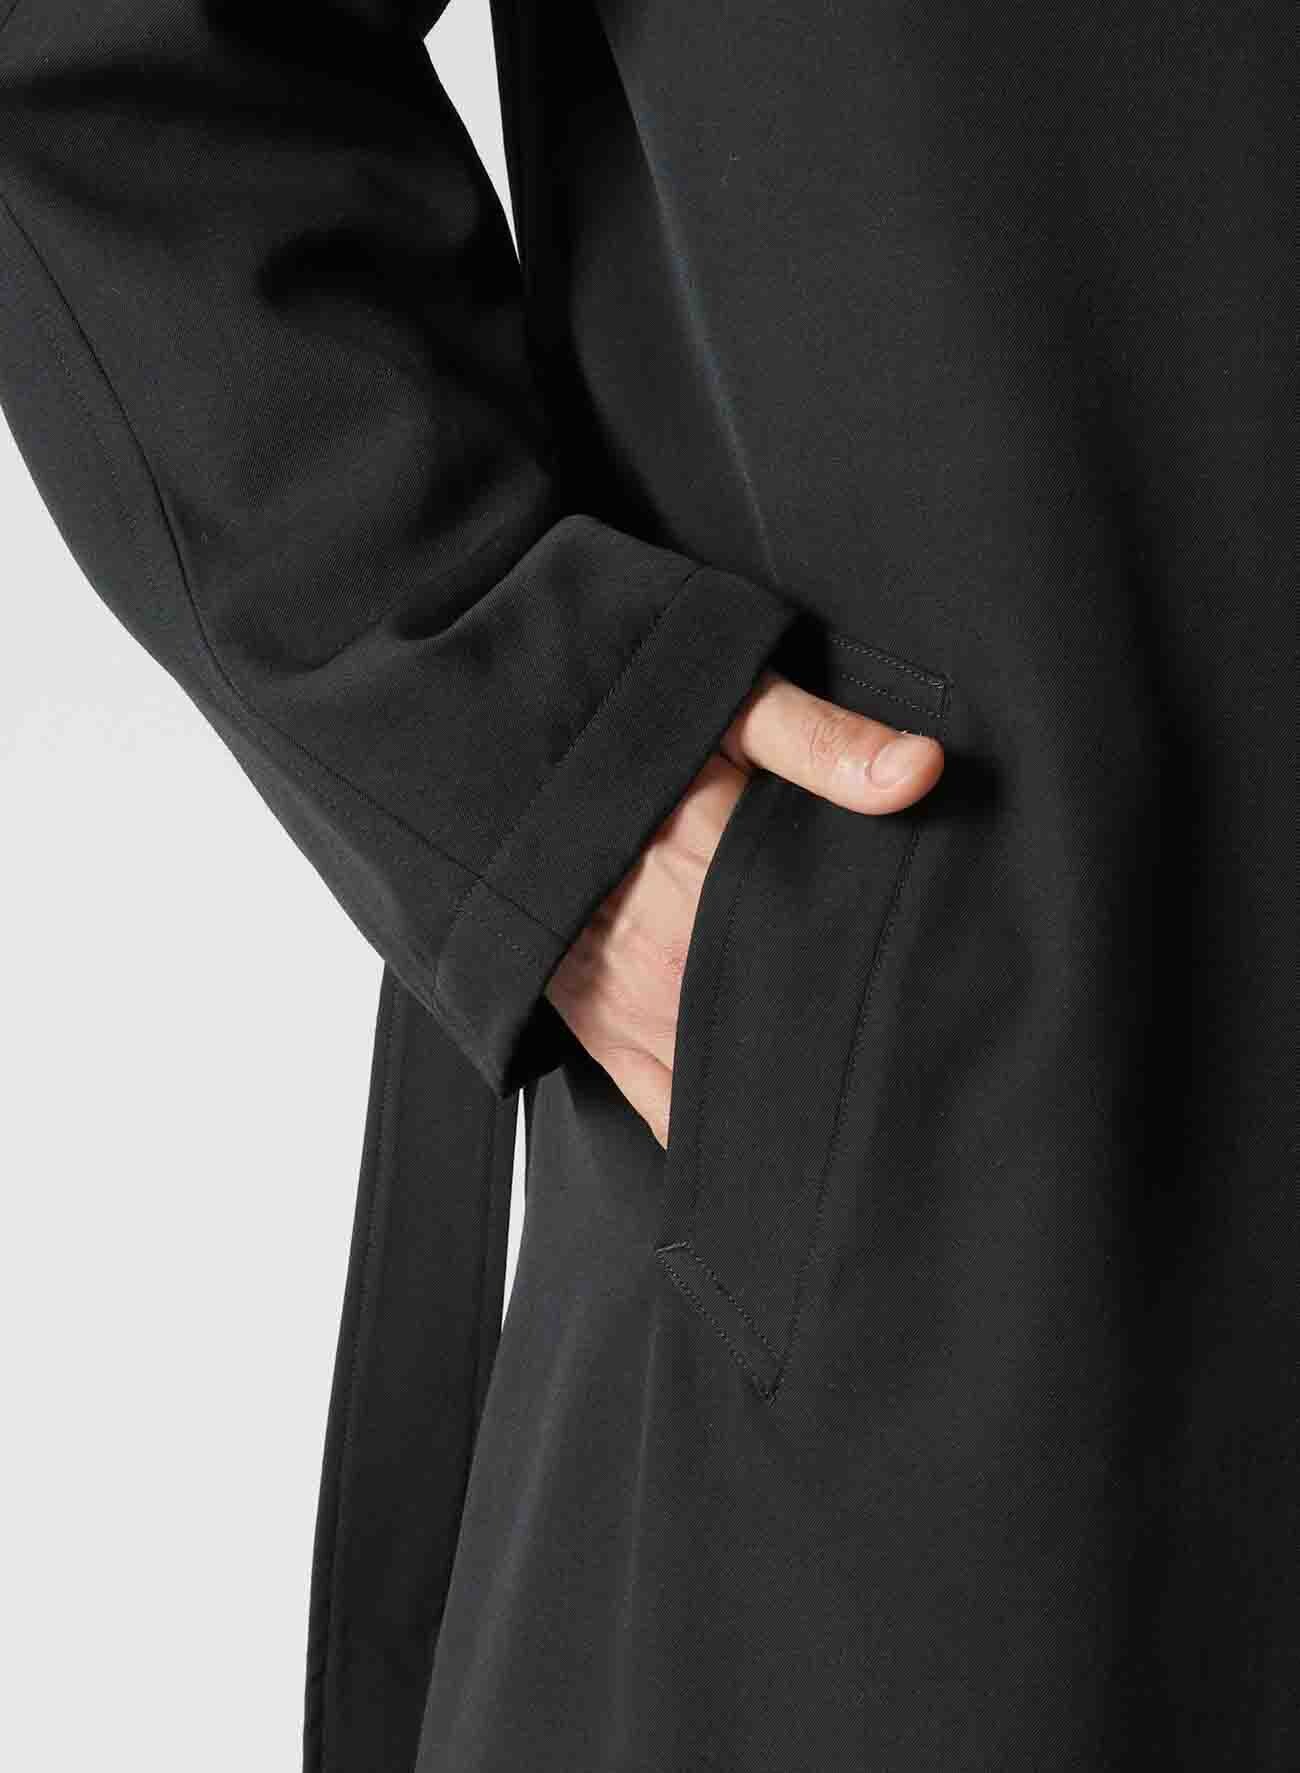 REGULATION W/GABARDINE 8BUTTON DOUBLE BREASTED COAT